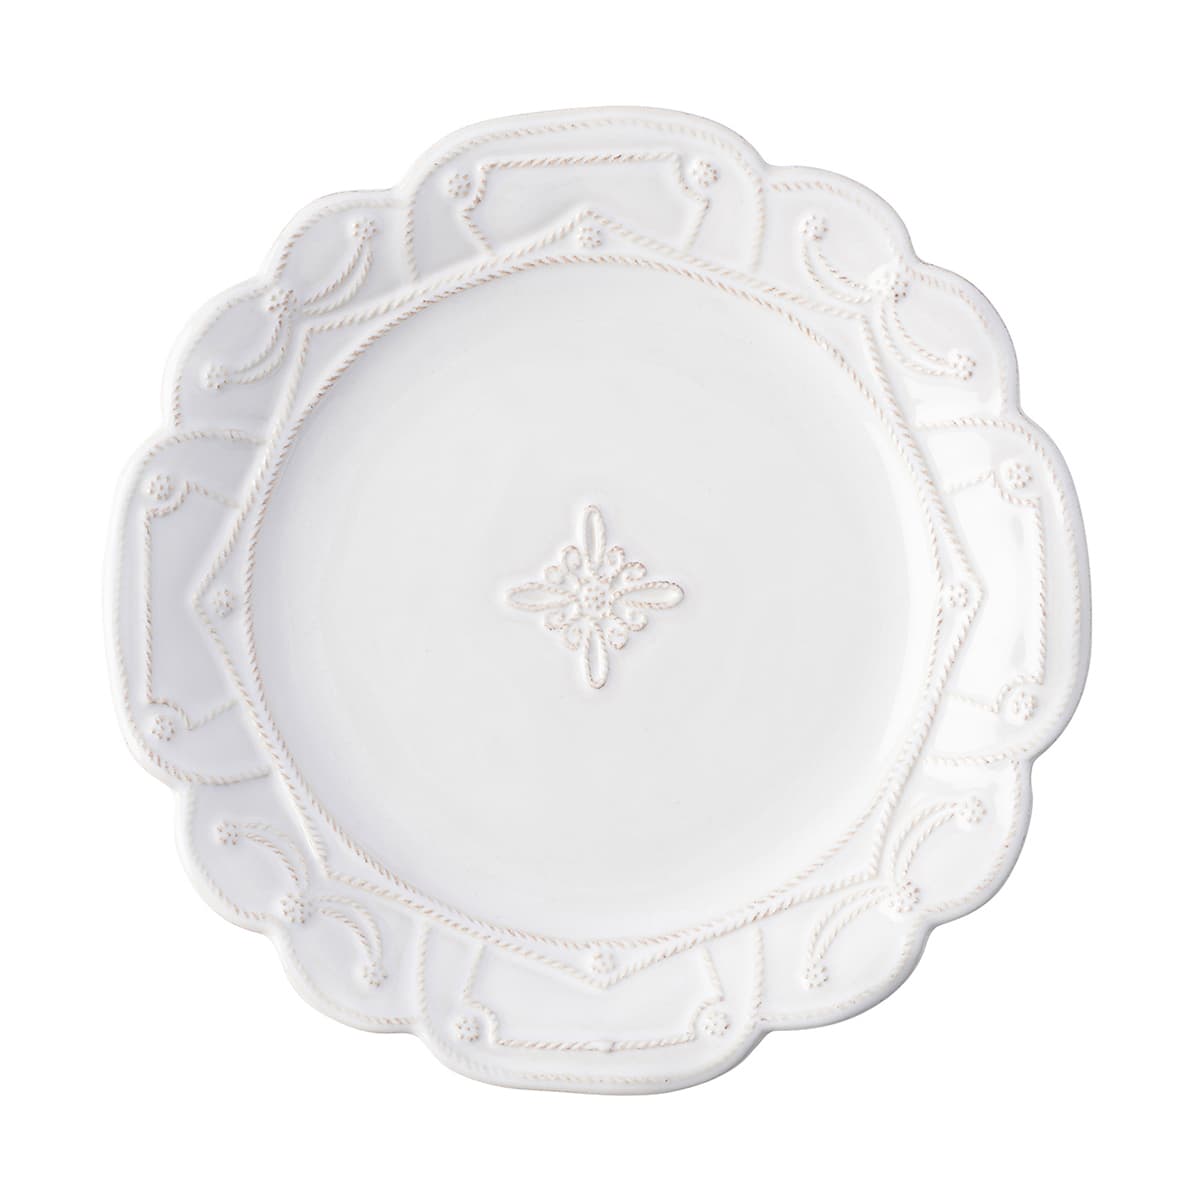 From our Jardins du Monde Collection - Nobly trimmed and hedged with elements of classical symmetry from our four enchanting gardens, this unifying plate adds a dash of elegant grandeur to any table.